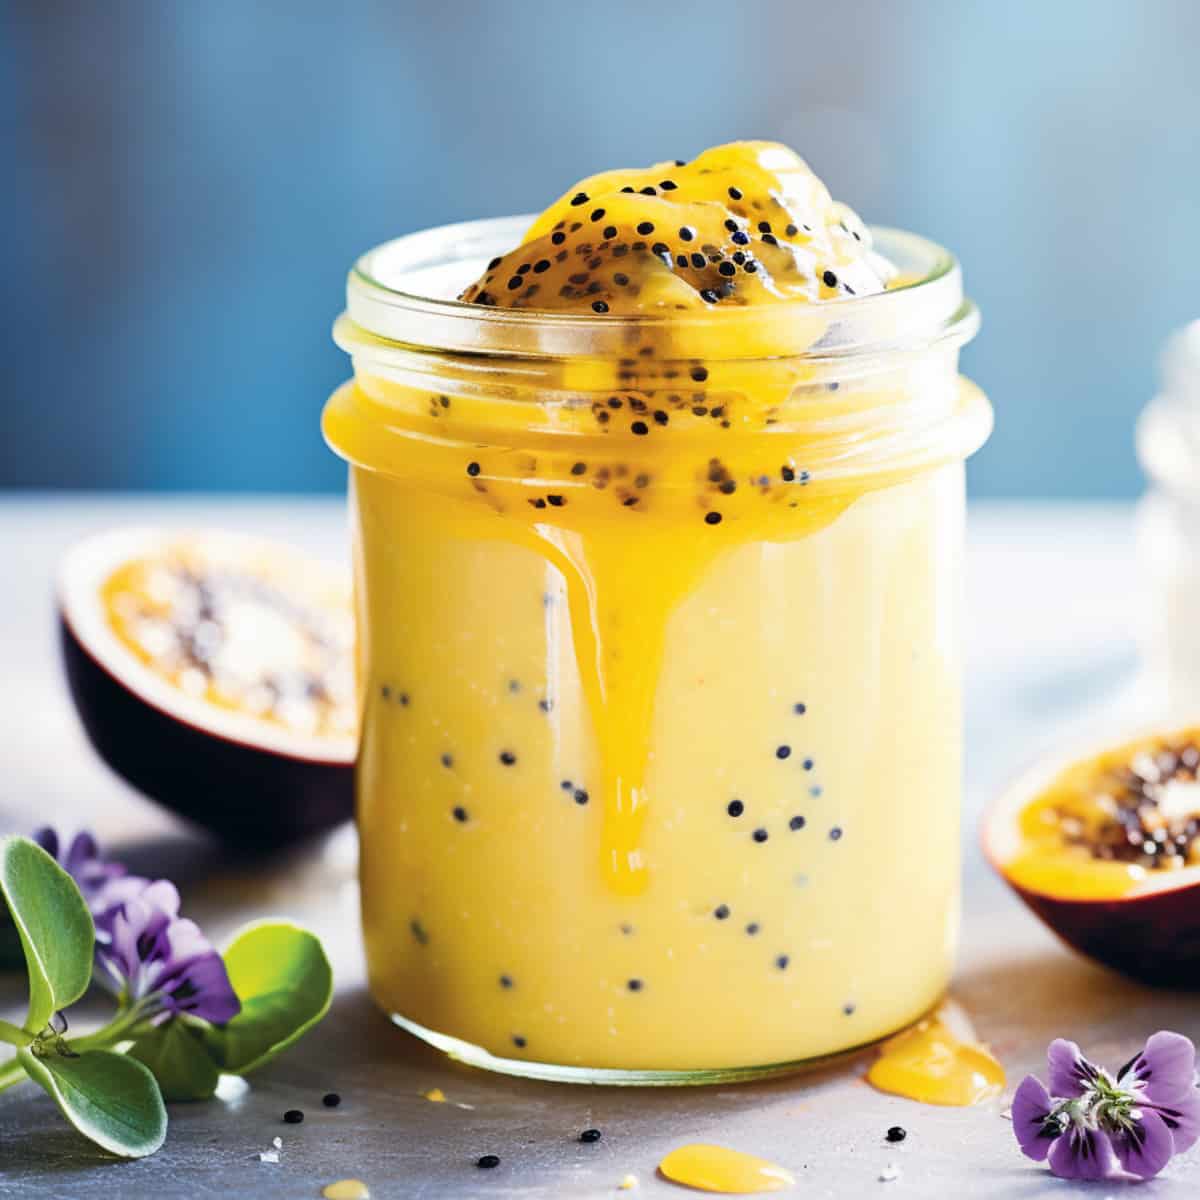 Passion fruit curd in a glass jar.